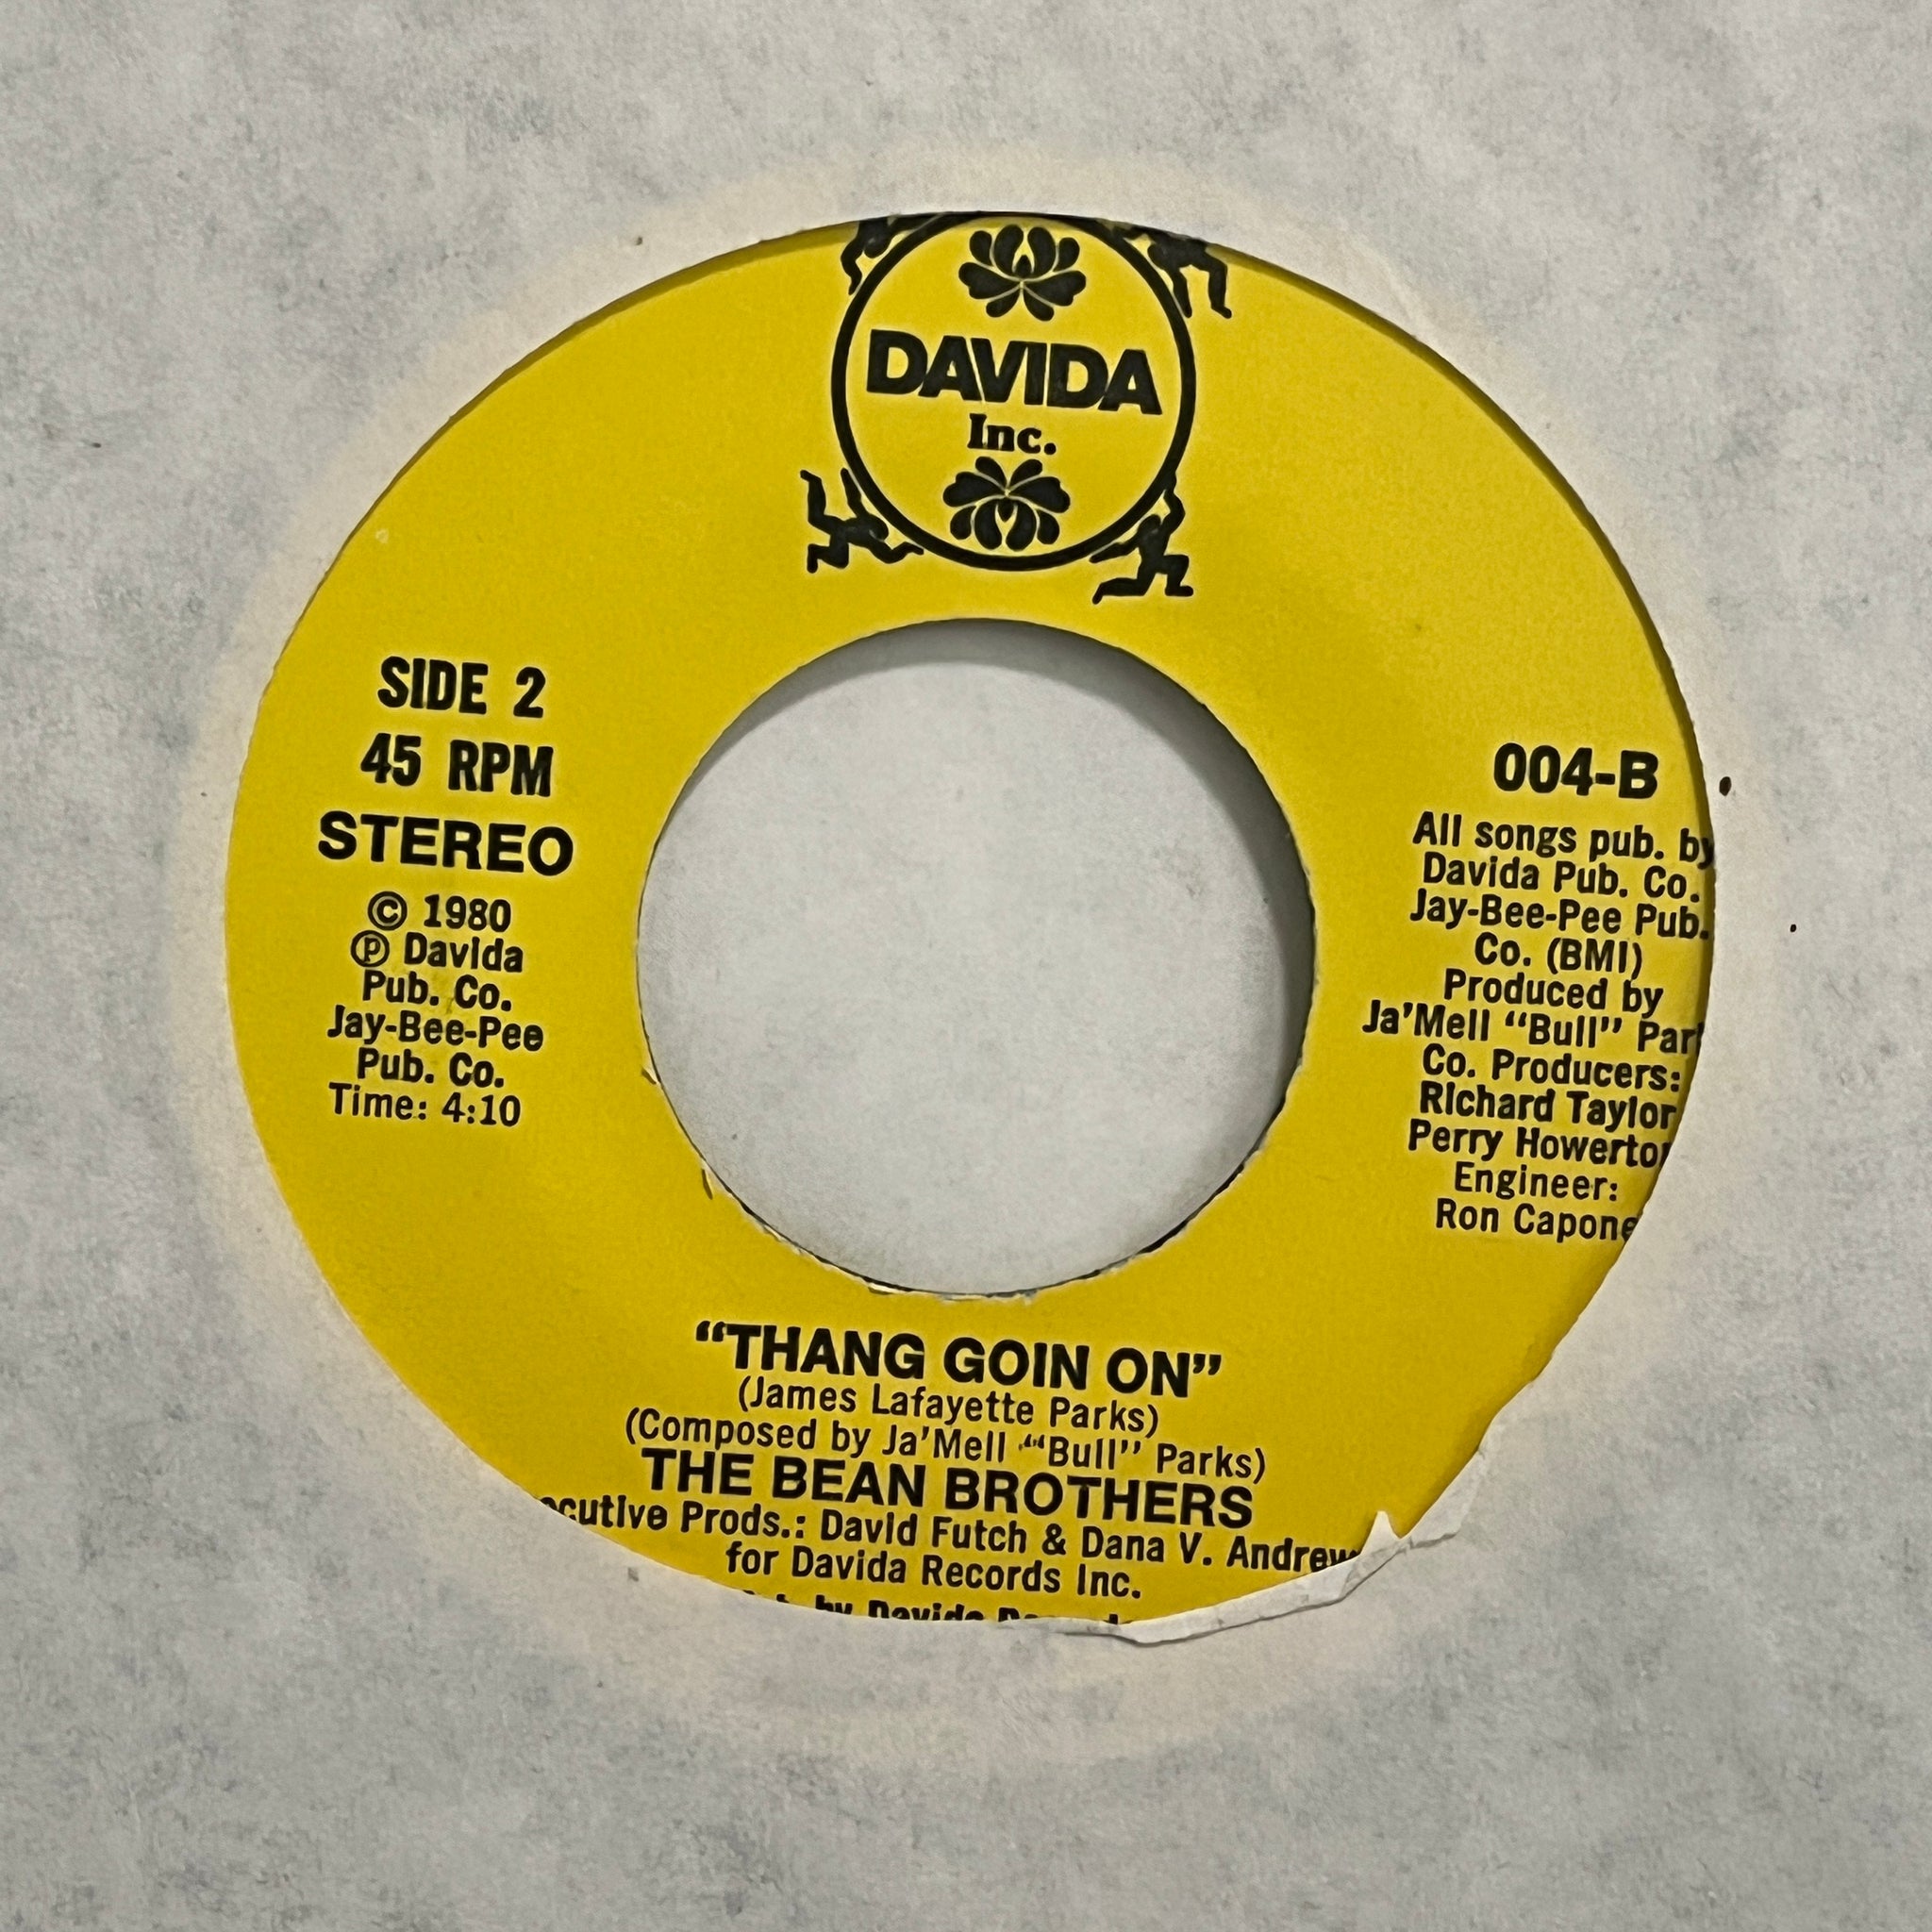 The Bean Brothers – Without You / Thang Goin On